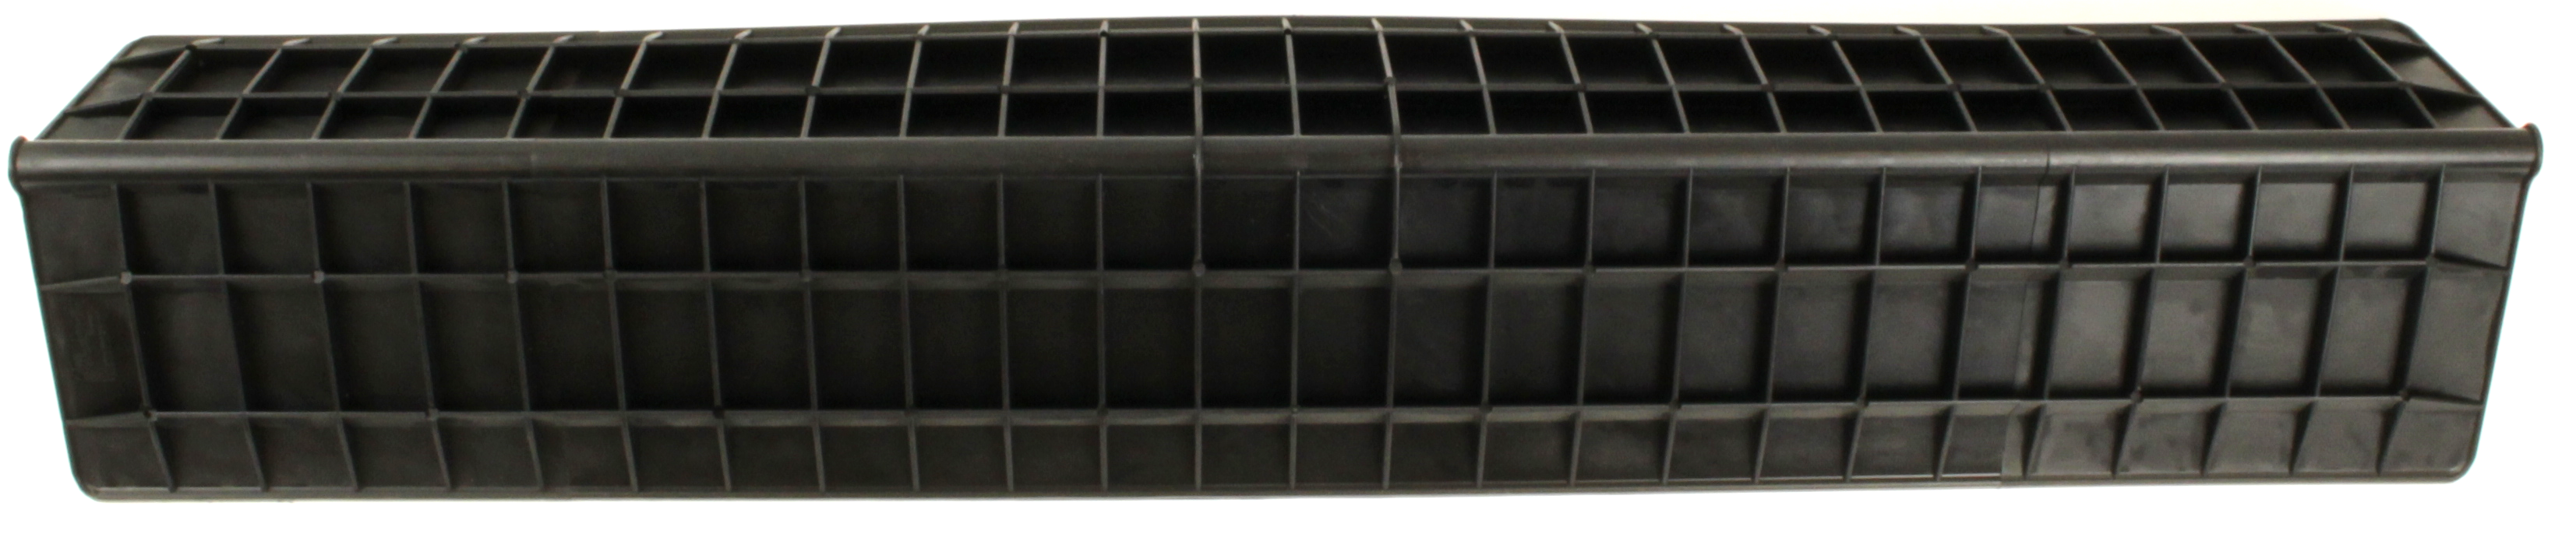 Long Heavy duty Corner Protector 800mm X 180mm X 140mm X 5mm Thickness Black with external ribs